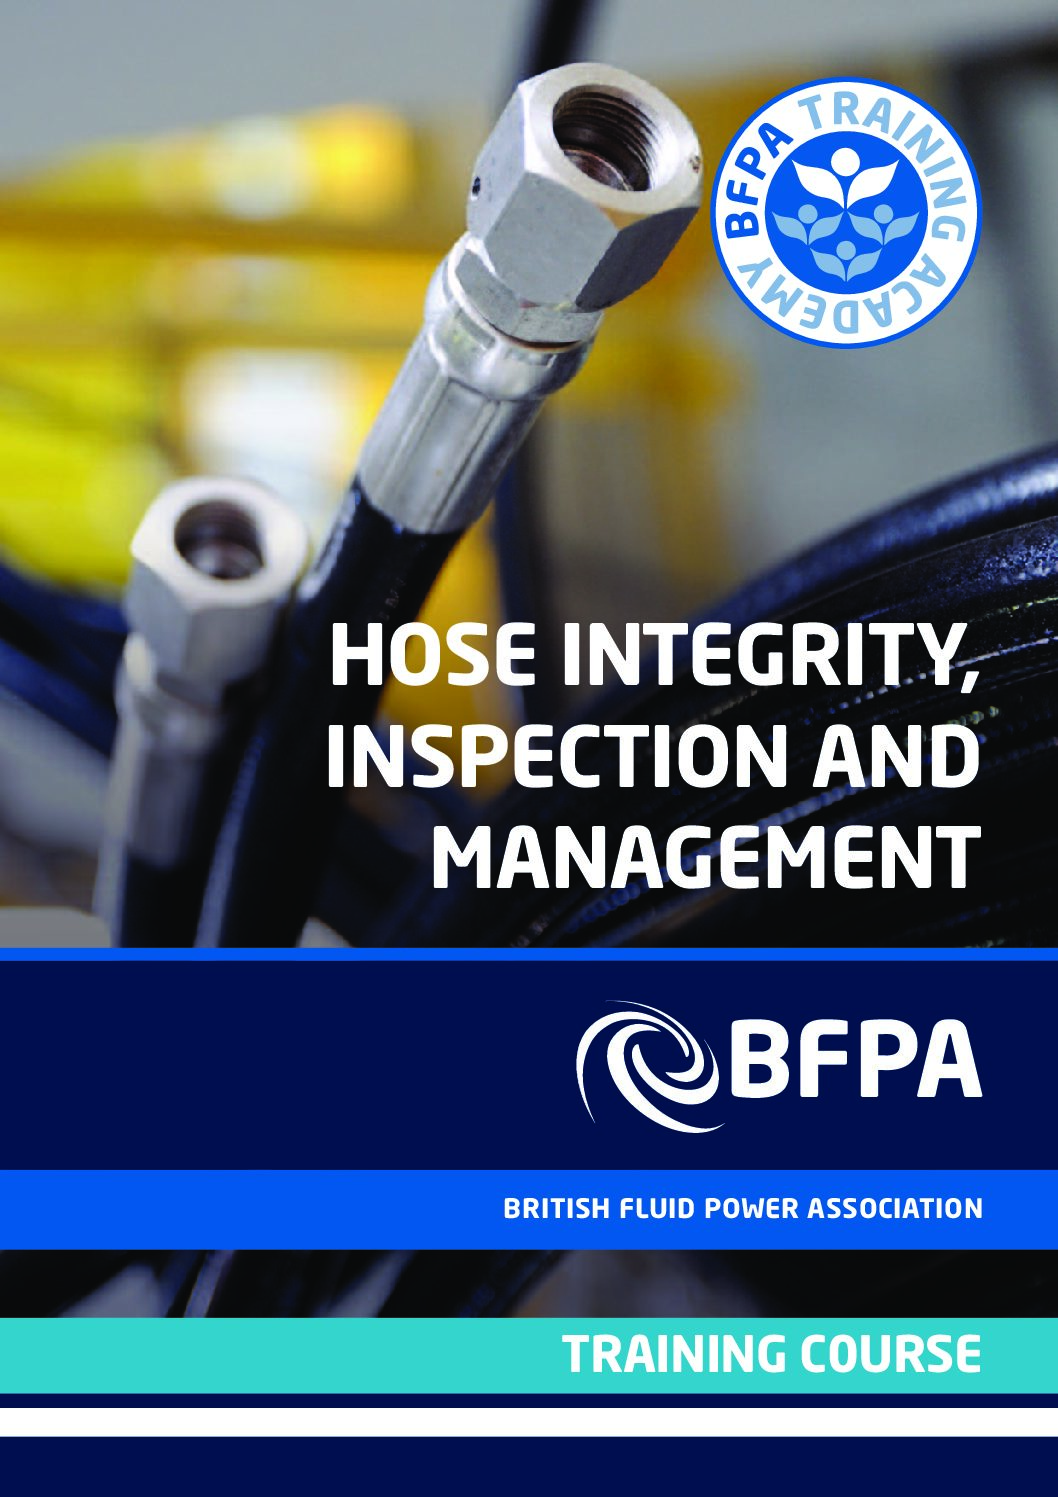 BFPA Hose Integrity, Inspection and Management Training Course Reference Manual